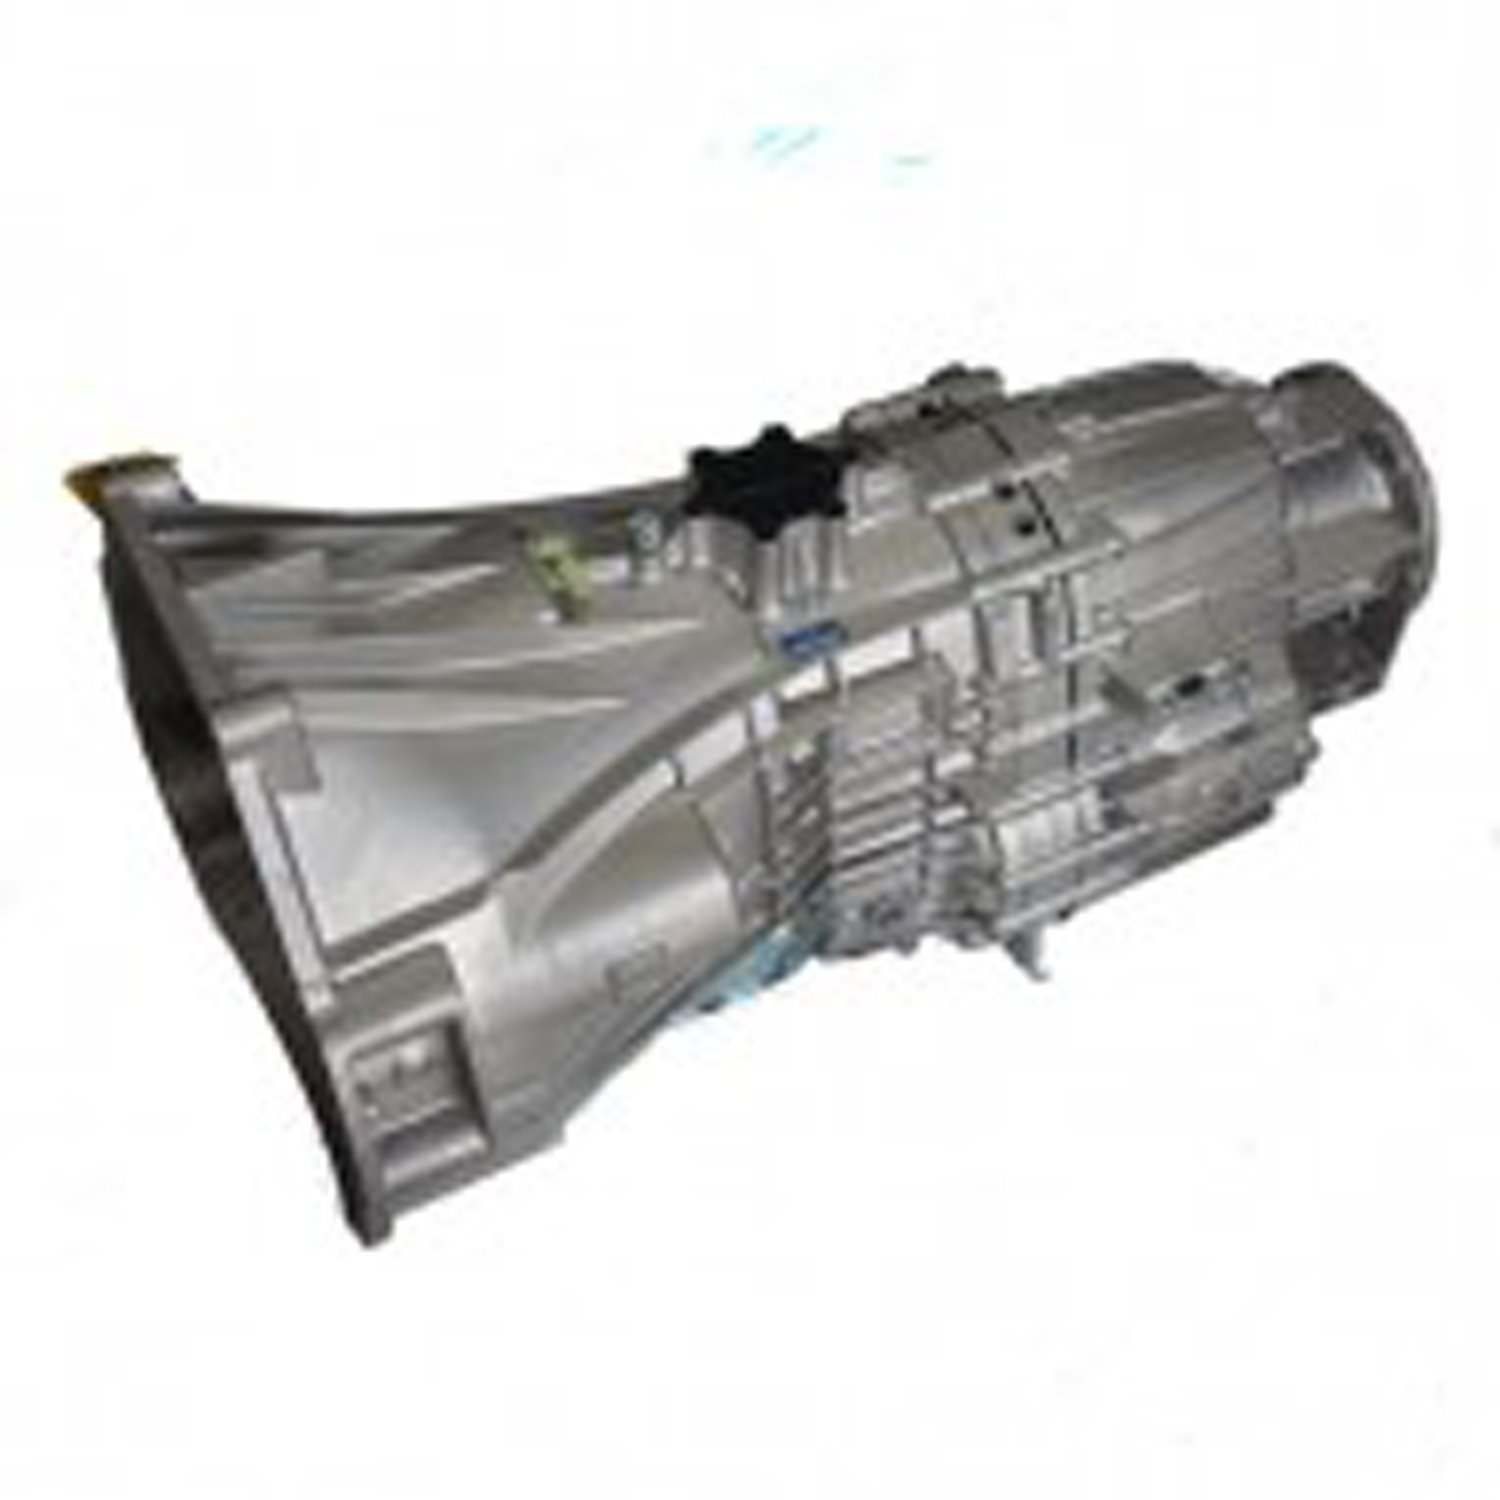 Remanufactured S6-S650F Manual Transmission for Ford 02-04